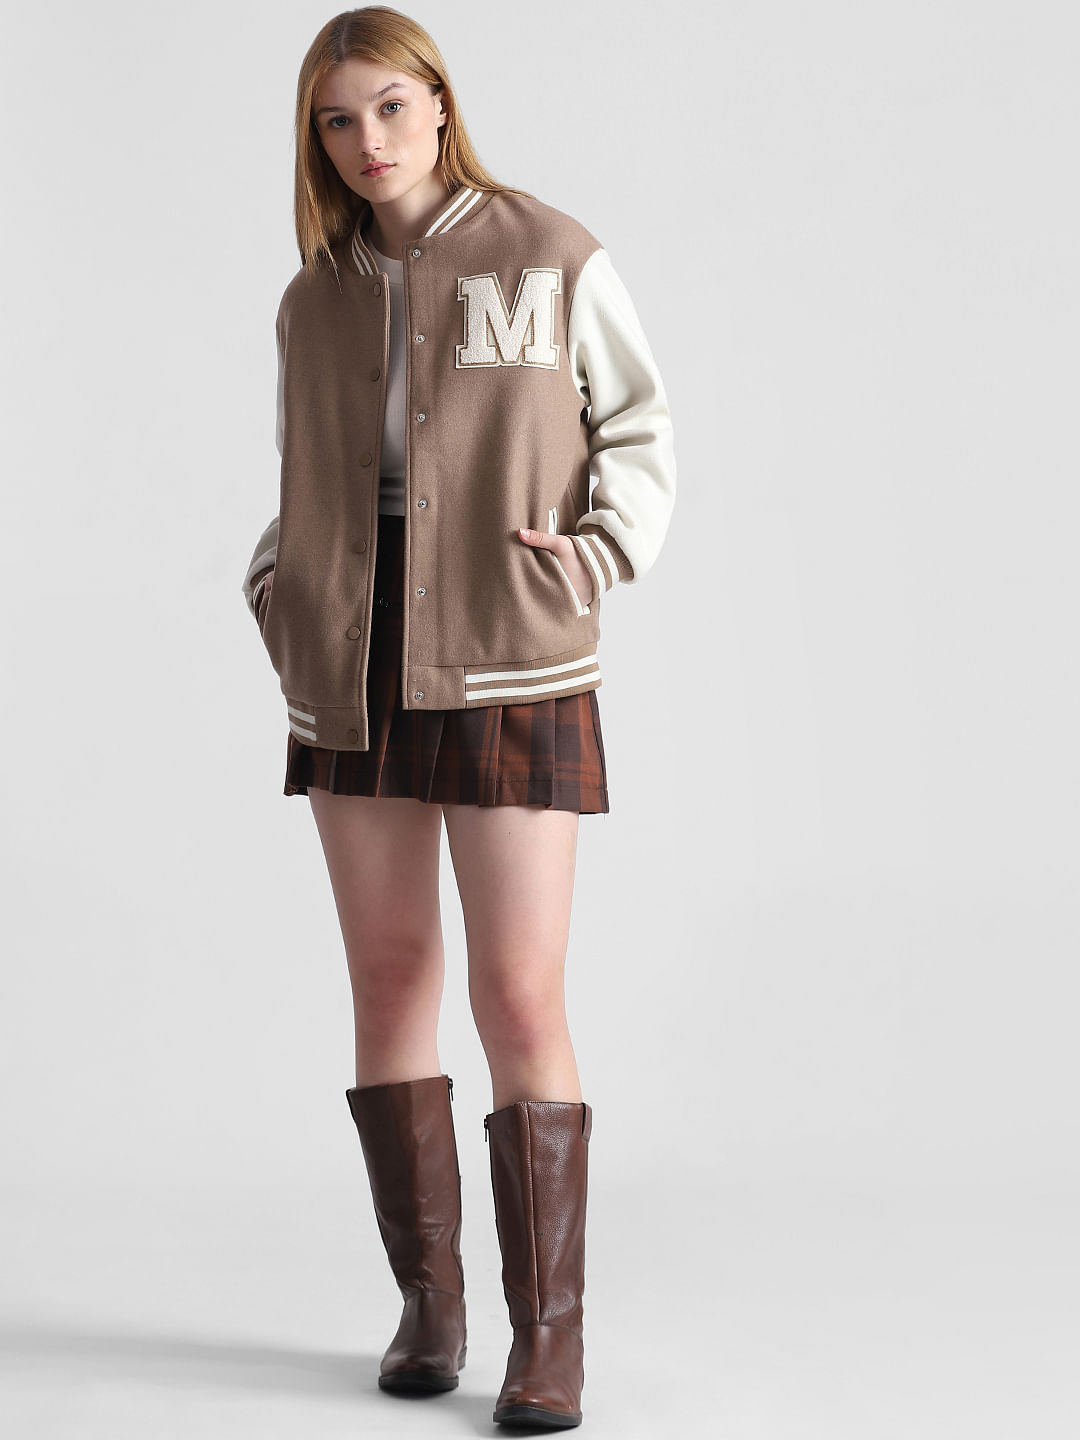 TAUPE(トープ) / Graphical Varsity Jacket